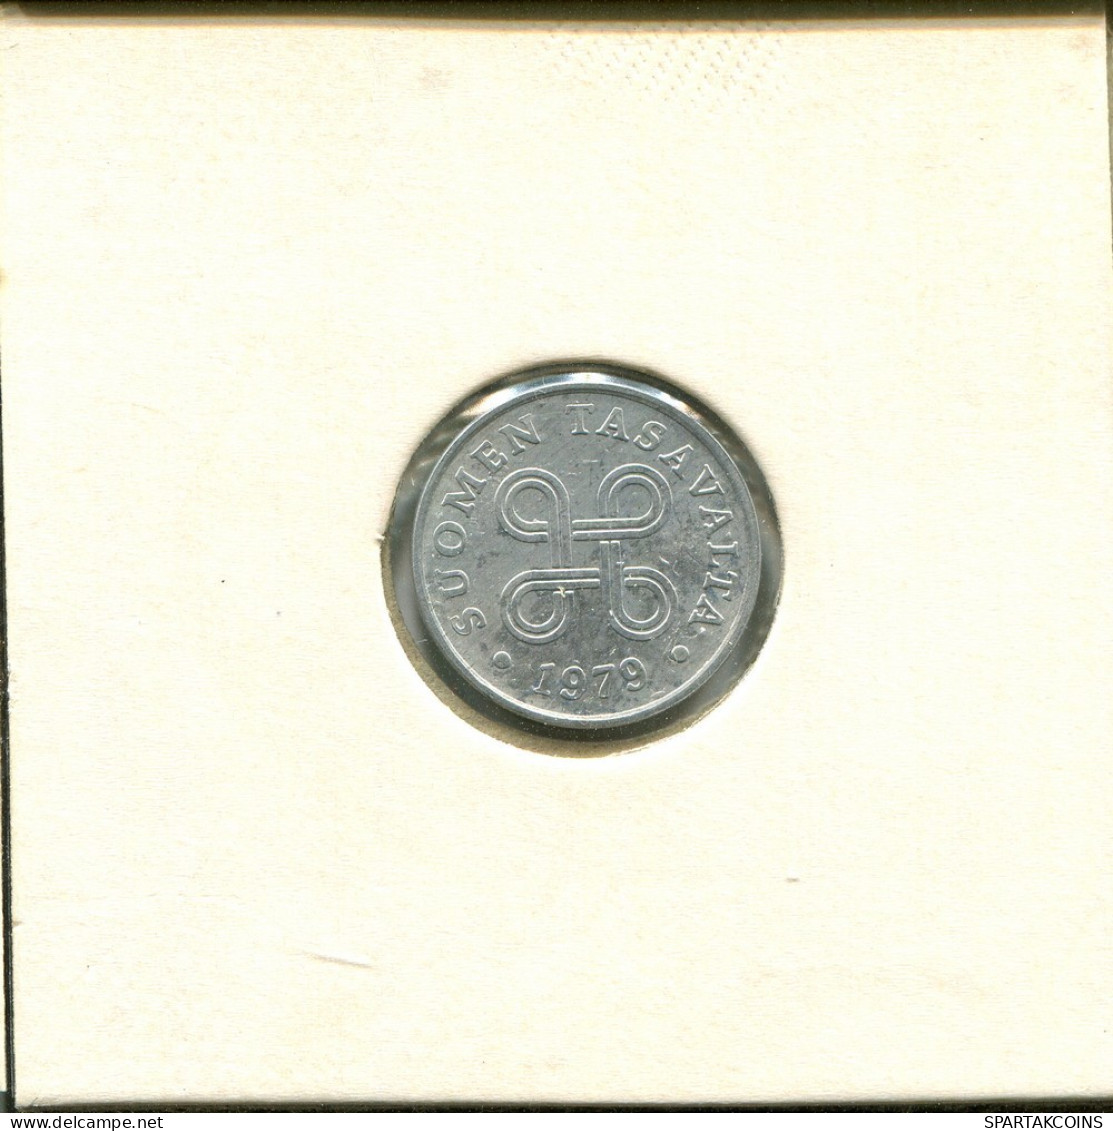 1 PENNY 1979 FINLAND Coin #AS722.U.A - Finland